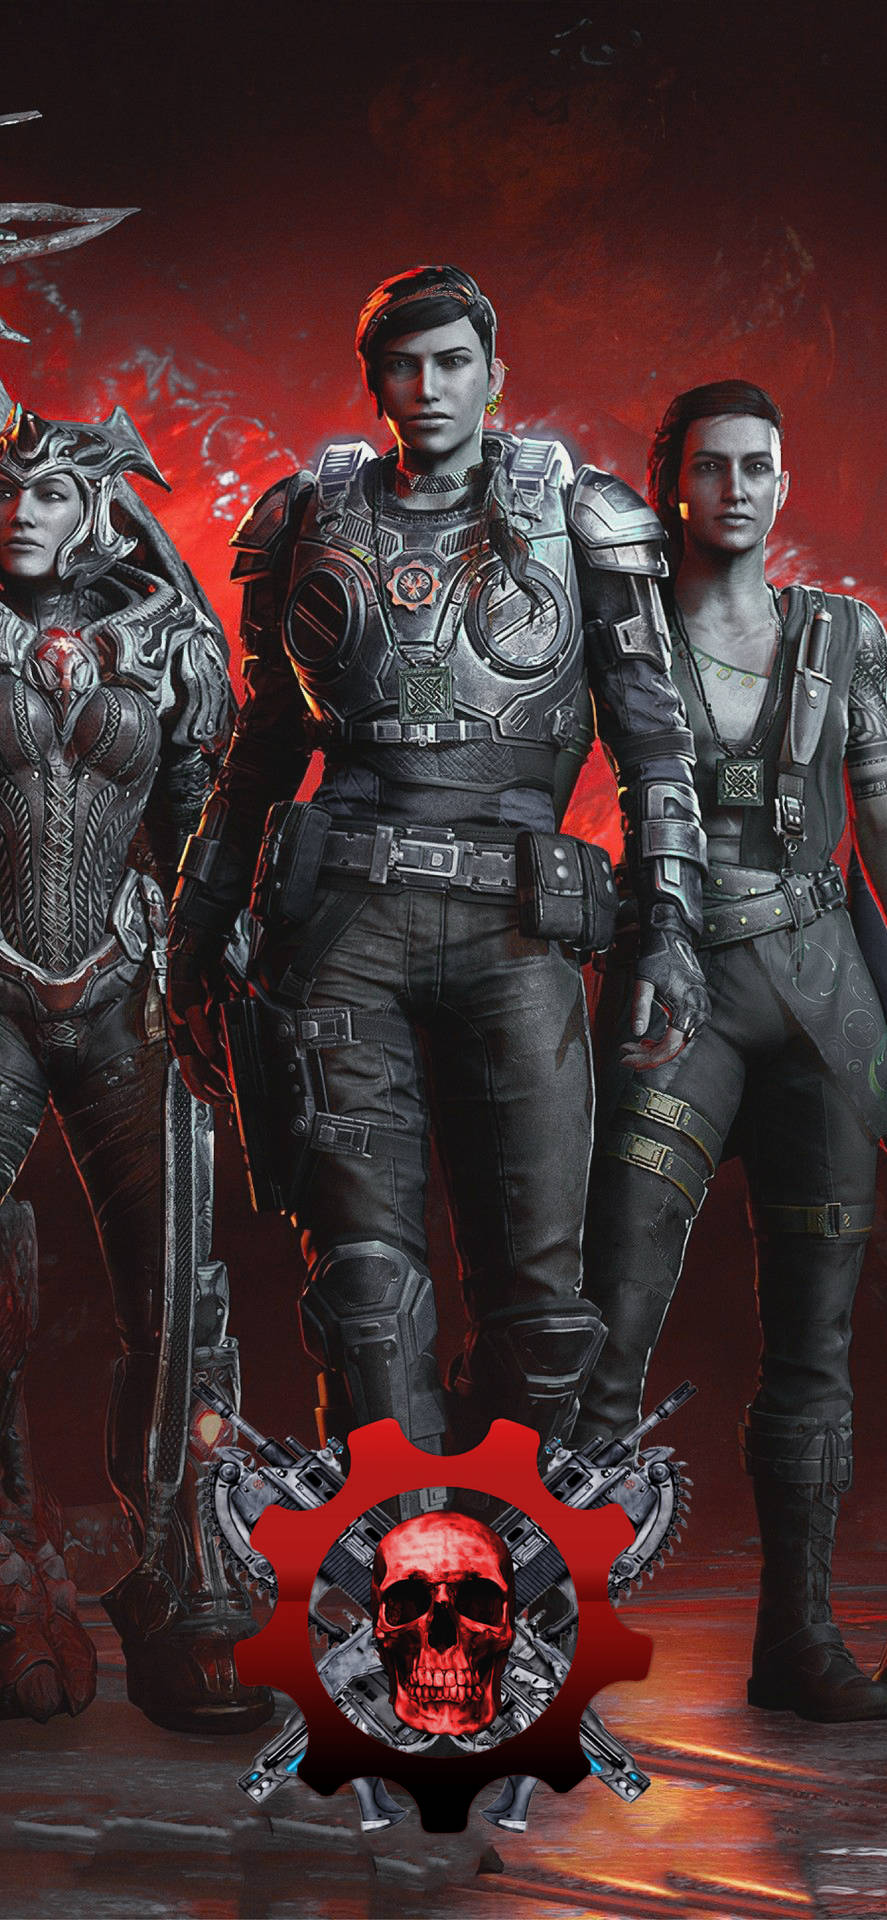 Kait With Female Warriors Gears 5 Iphone Background